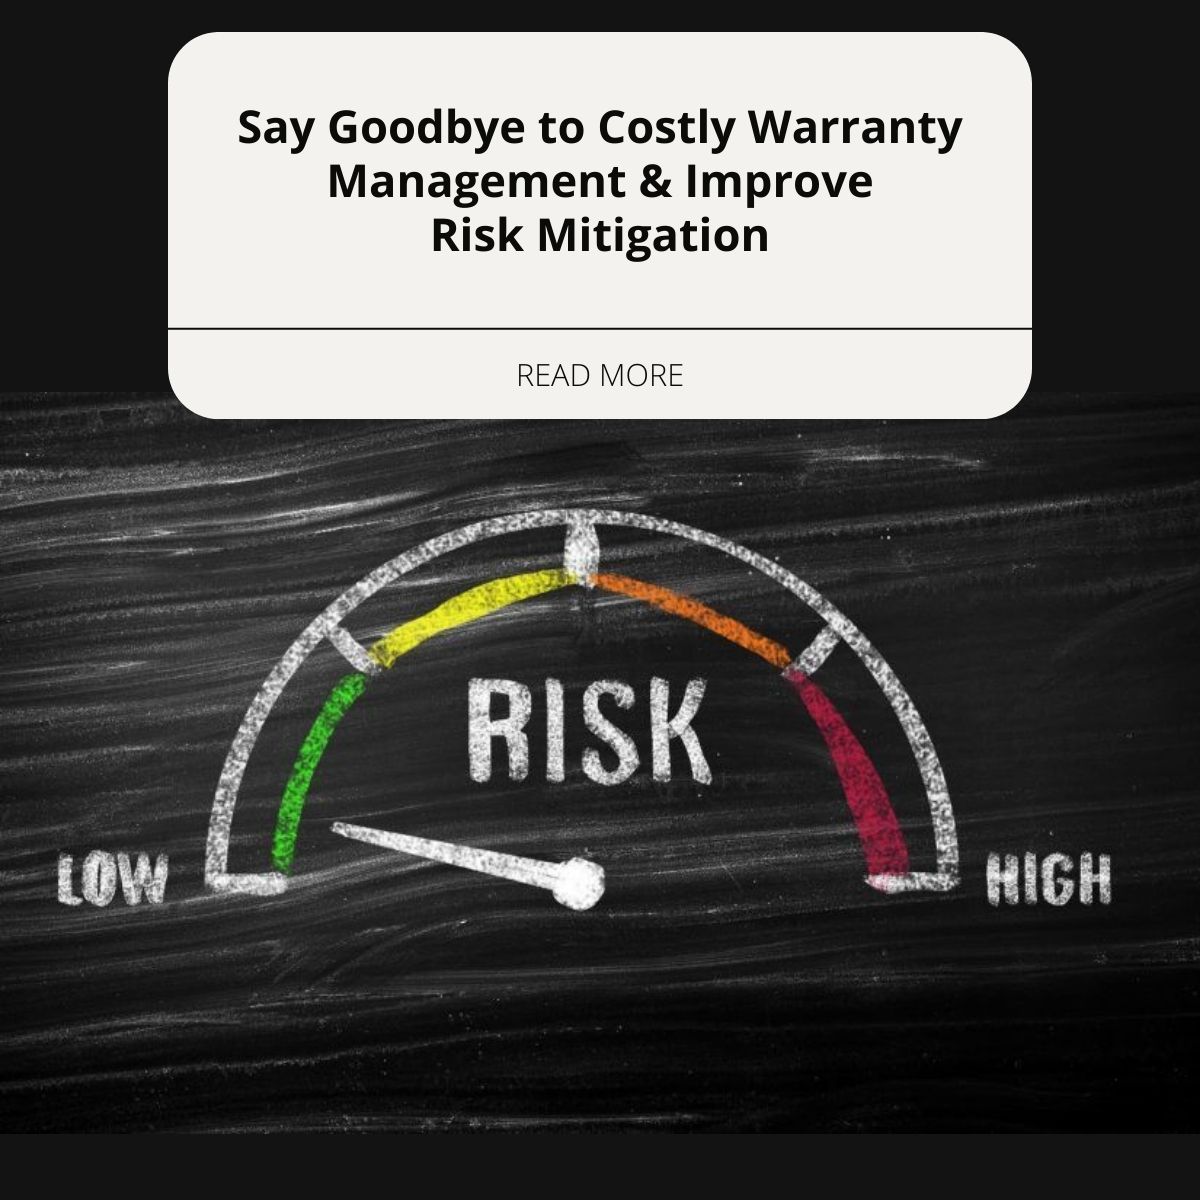 Say Goodbye to Costly Warranty Management & Improve Risk Mitigation